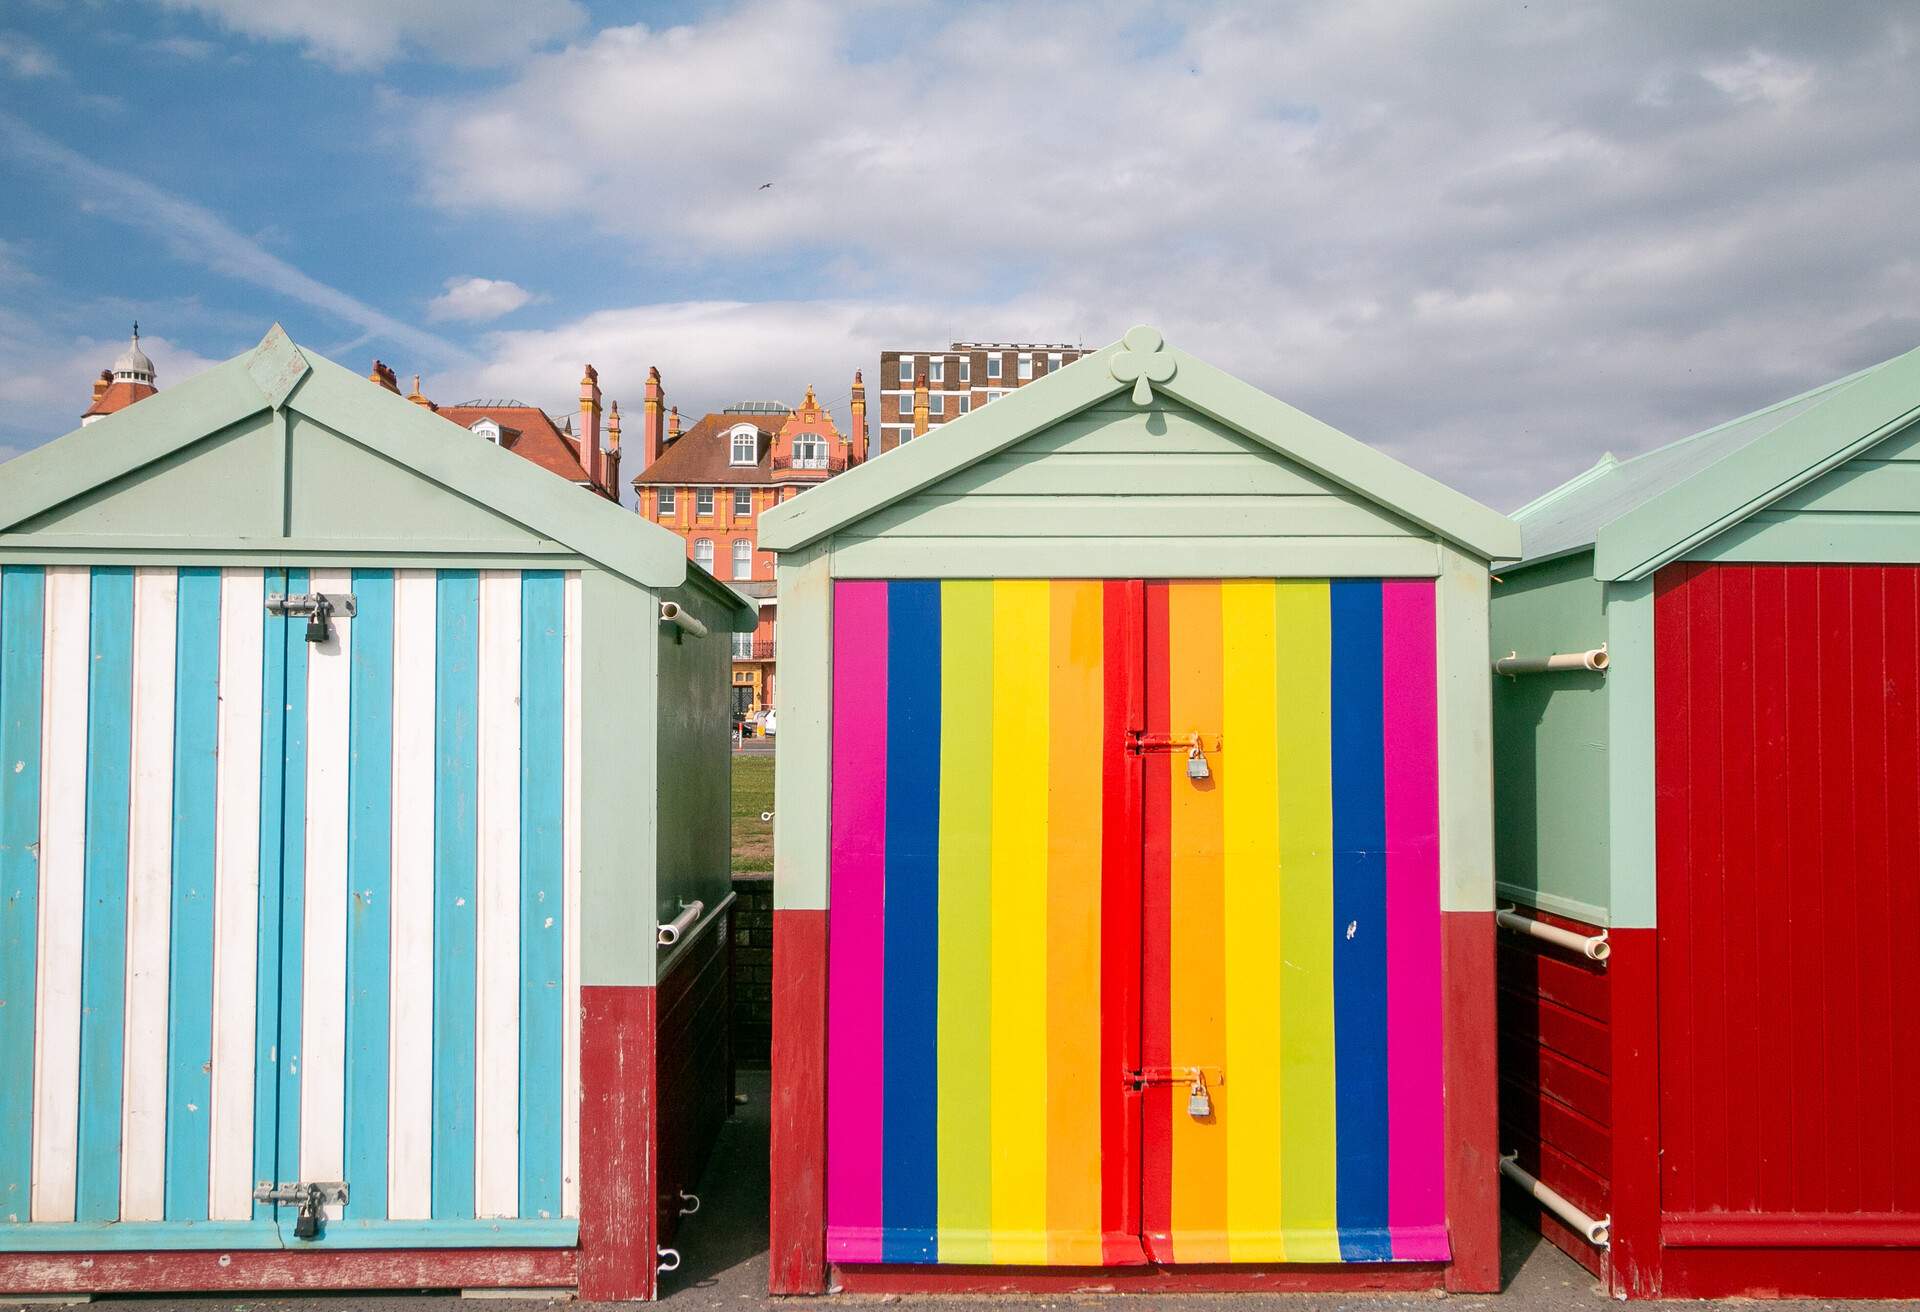 Hove Beach Huts in Brighton &amp; Hove, England. Some of these are hired out for holidays, others are sold and some rented.